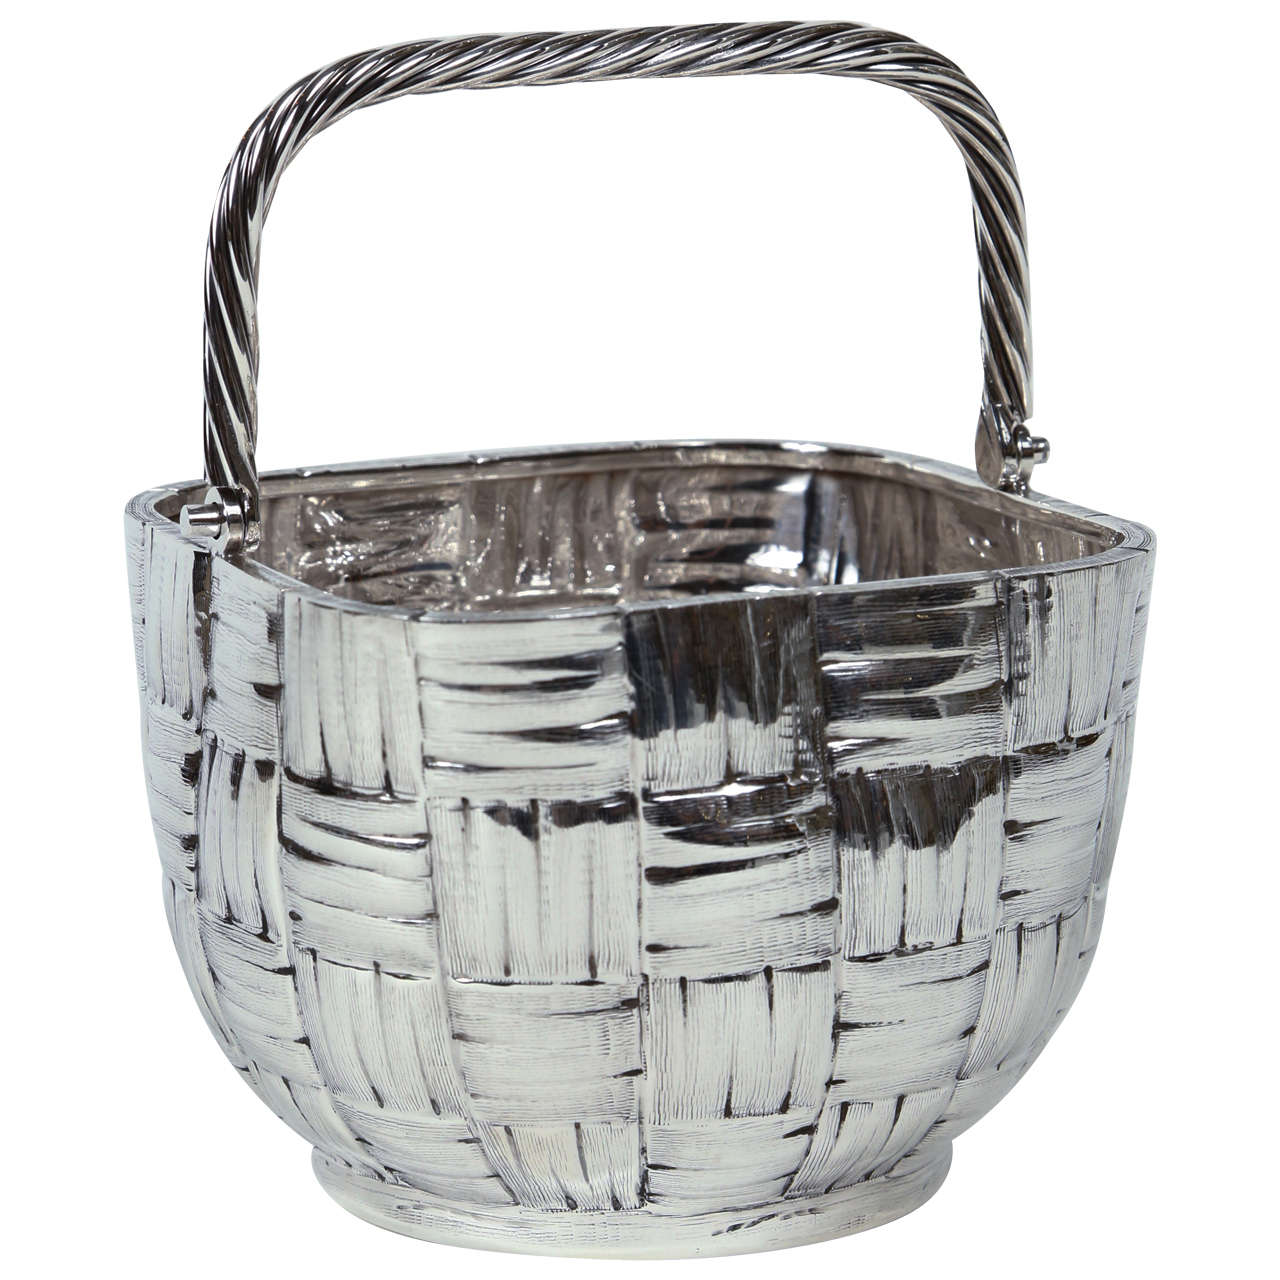 Italian Sterling Silver Basket by Fratelli Cacchione